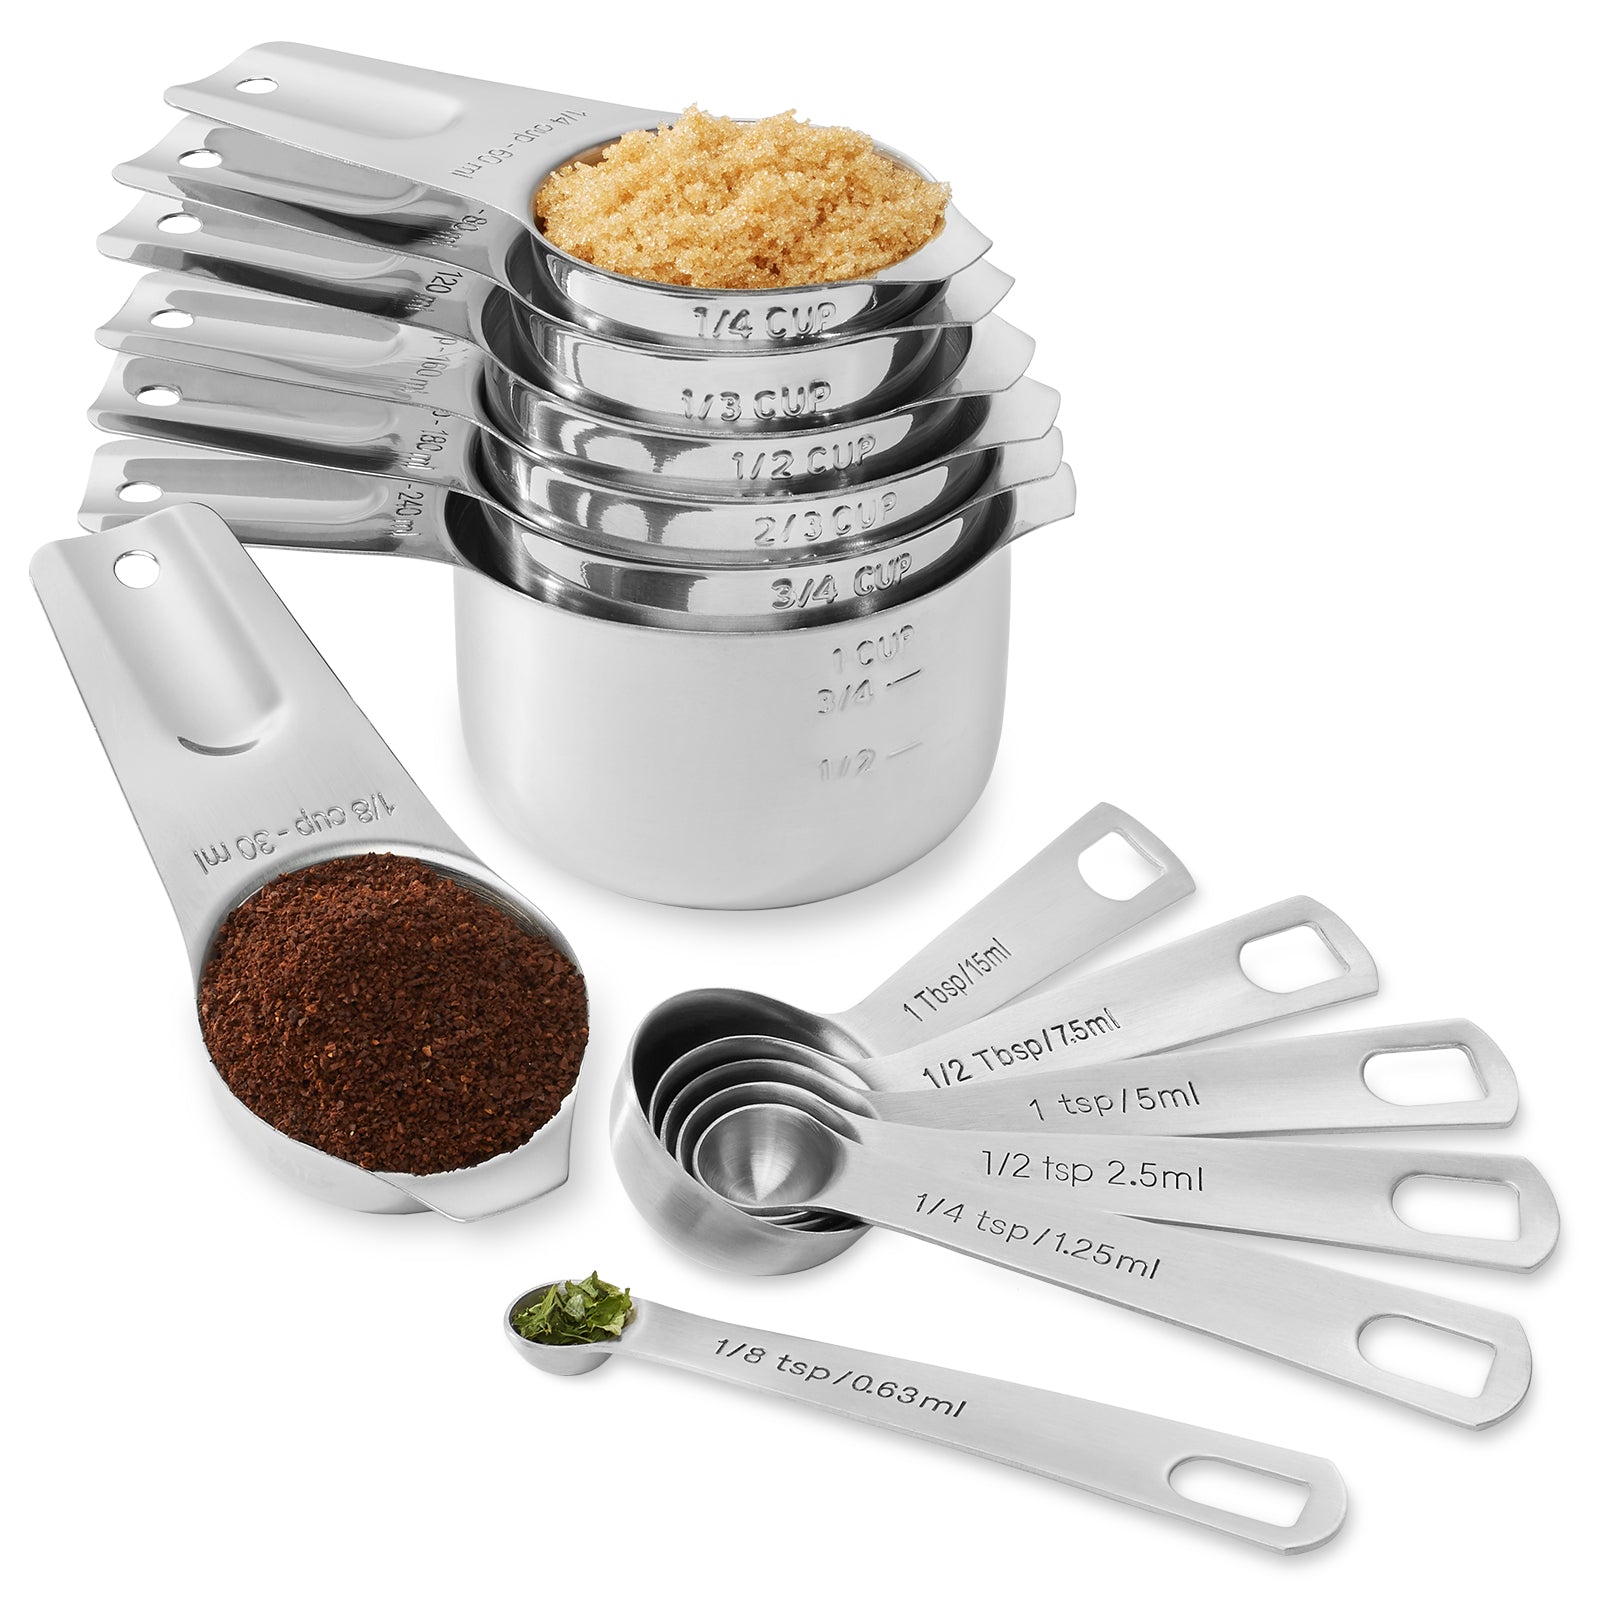 18/8 Stainless Steel Measuring Spoons, Each Set Of 6 Kitchen Measuring  Spoons: 1/8 Tsp, 1/4 Tsp, 1/2 Tsp, 1 Tsp, 1/2 Tsp Tablespoons And 1  Tablespoon